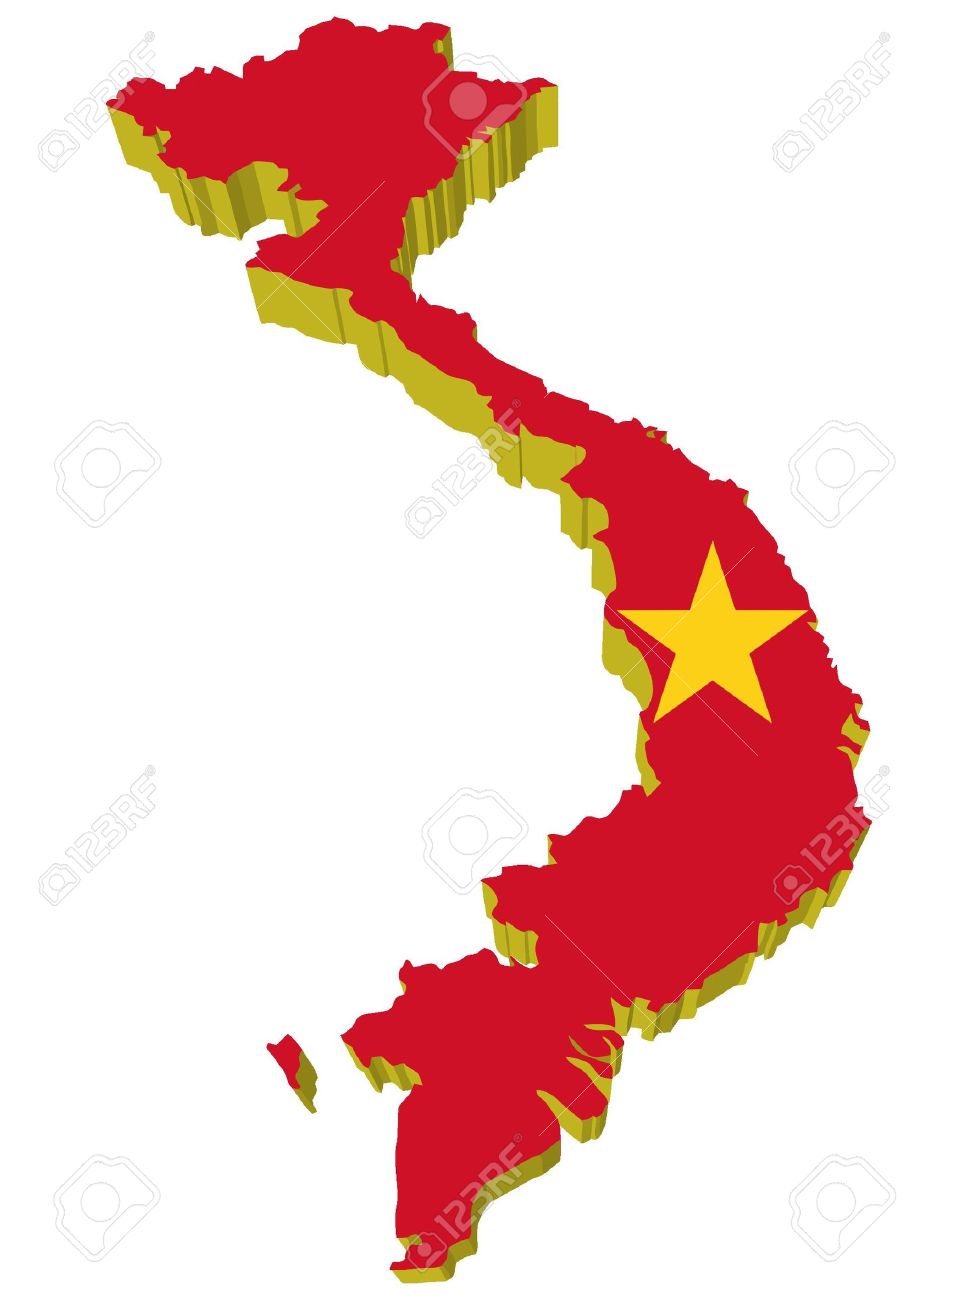 Map of vietnam clipart black and white.